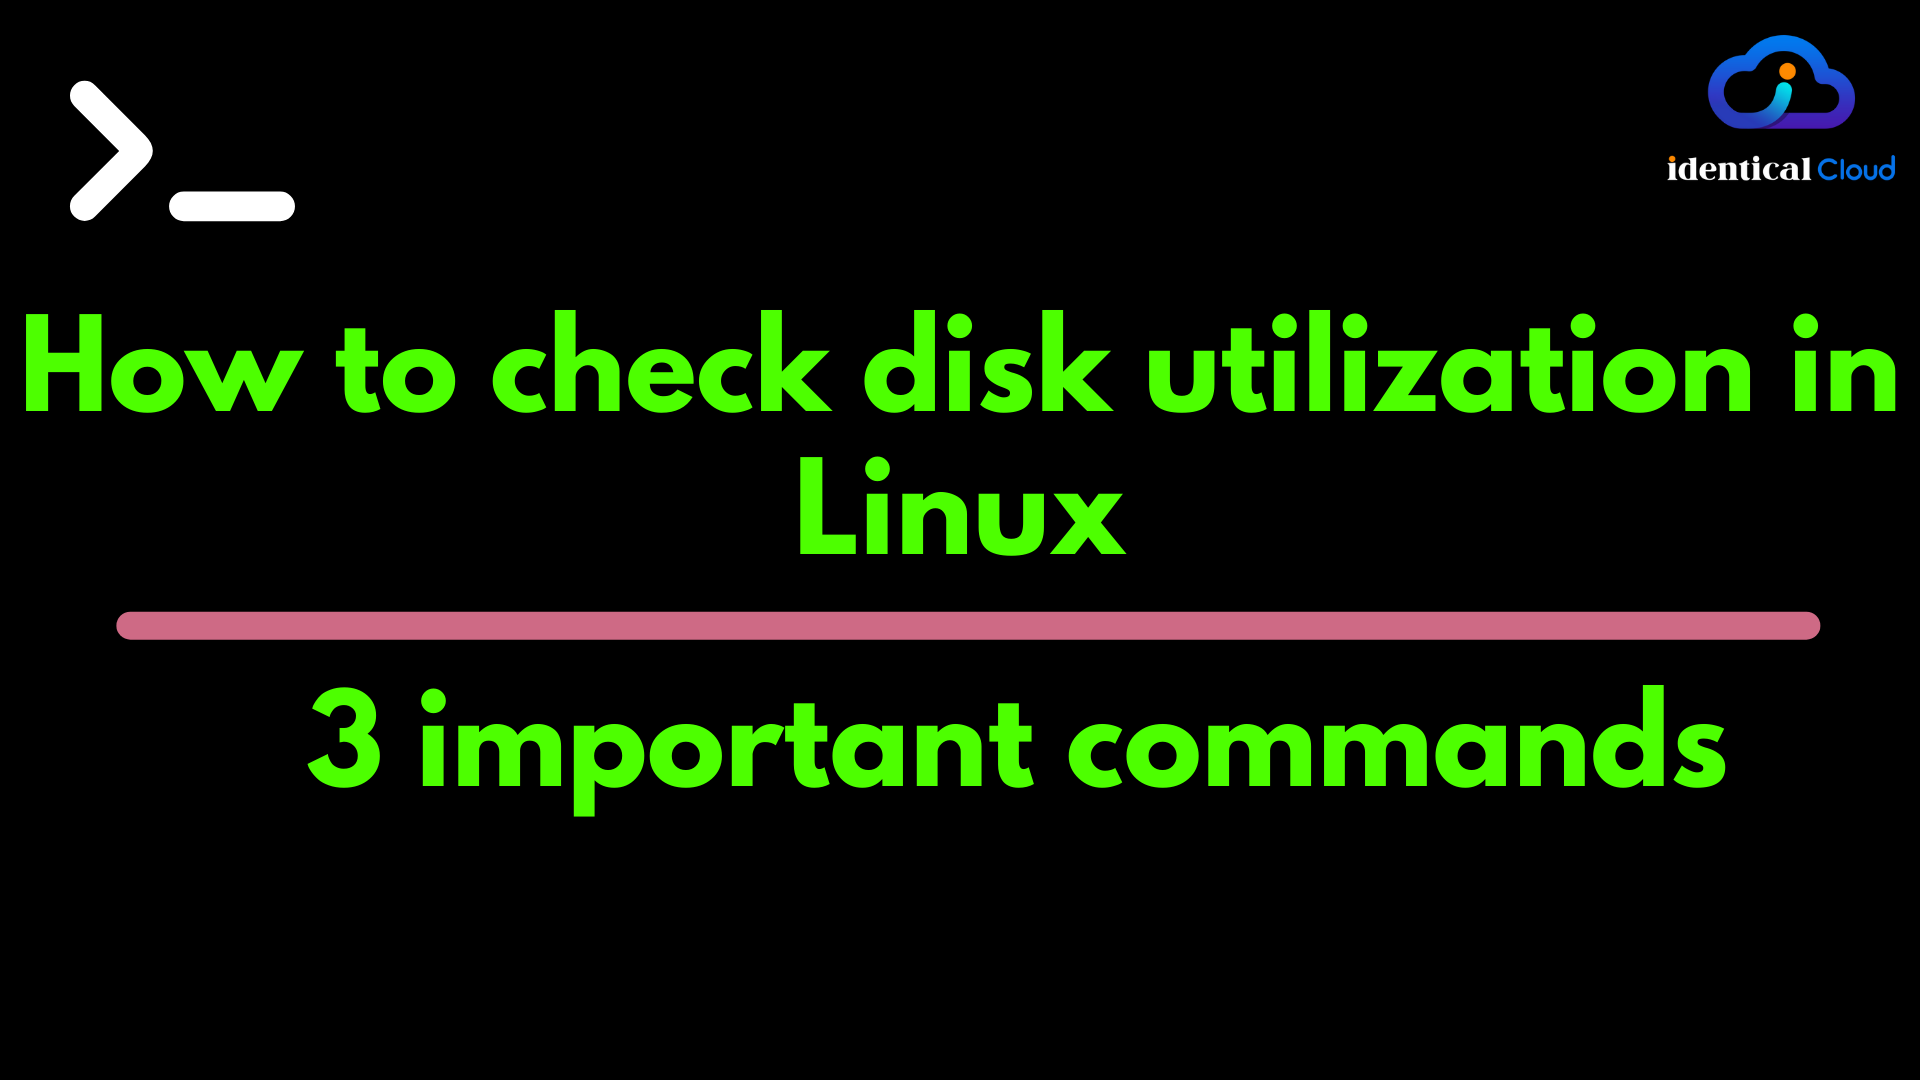 How to check disk utilization in Linux - 3 important commands